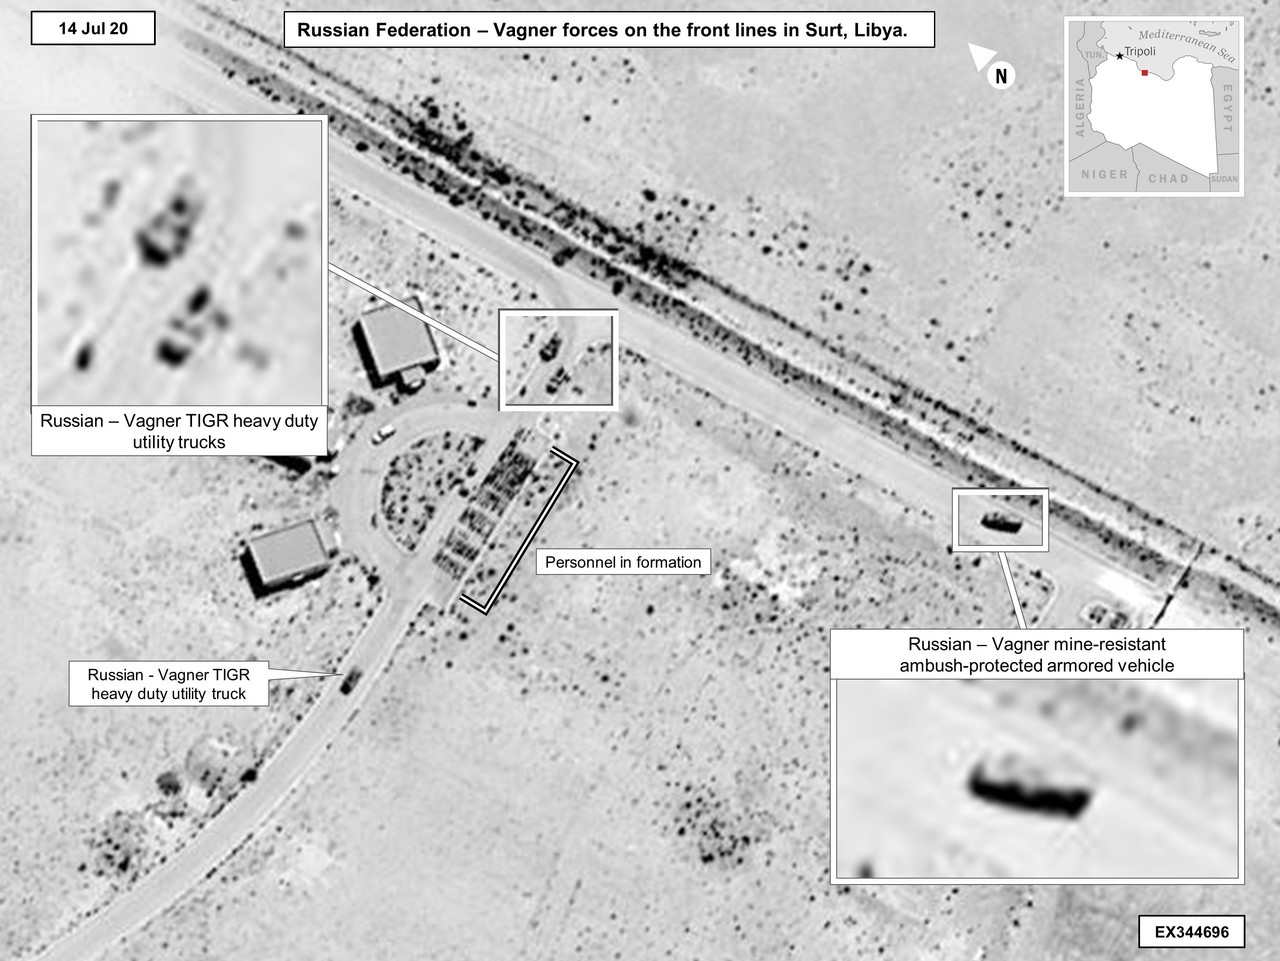 Pentagon Imagery Shows Russia, Wagner Group Continue Military in Libya